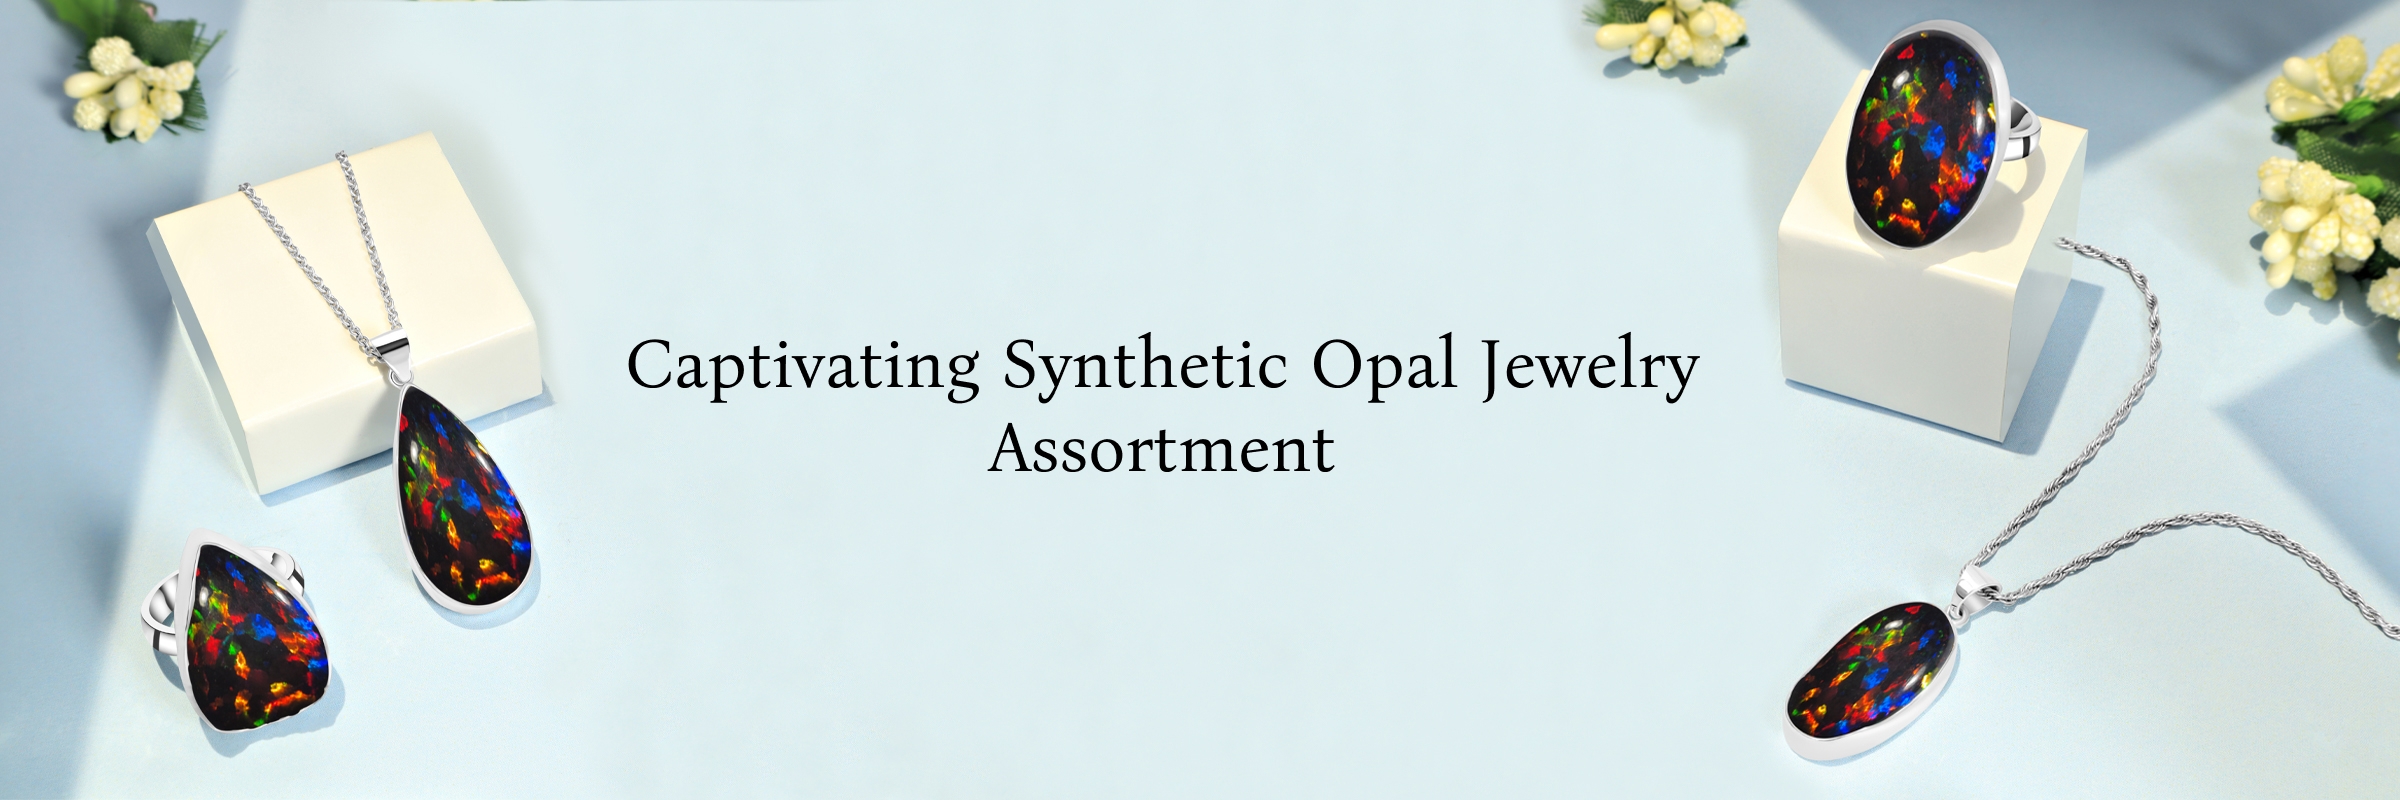 A Charming Collection of Synthetic Opal Jewelry